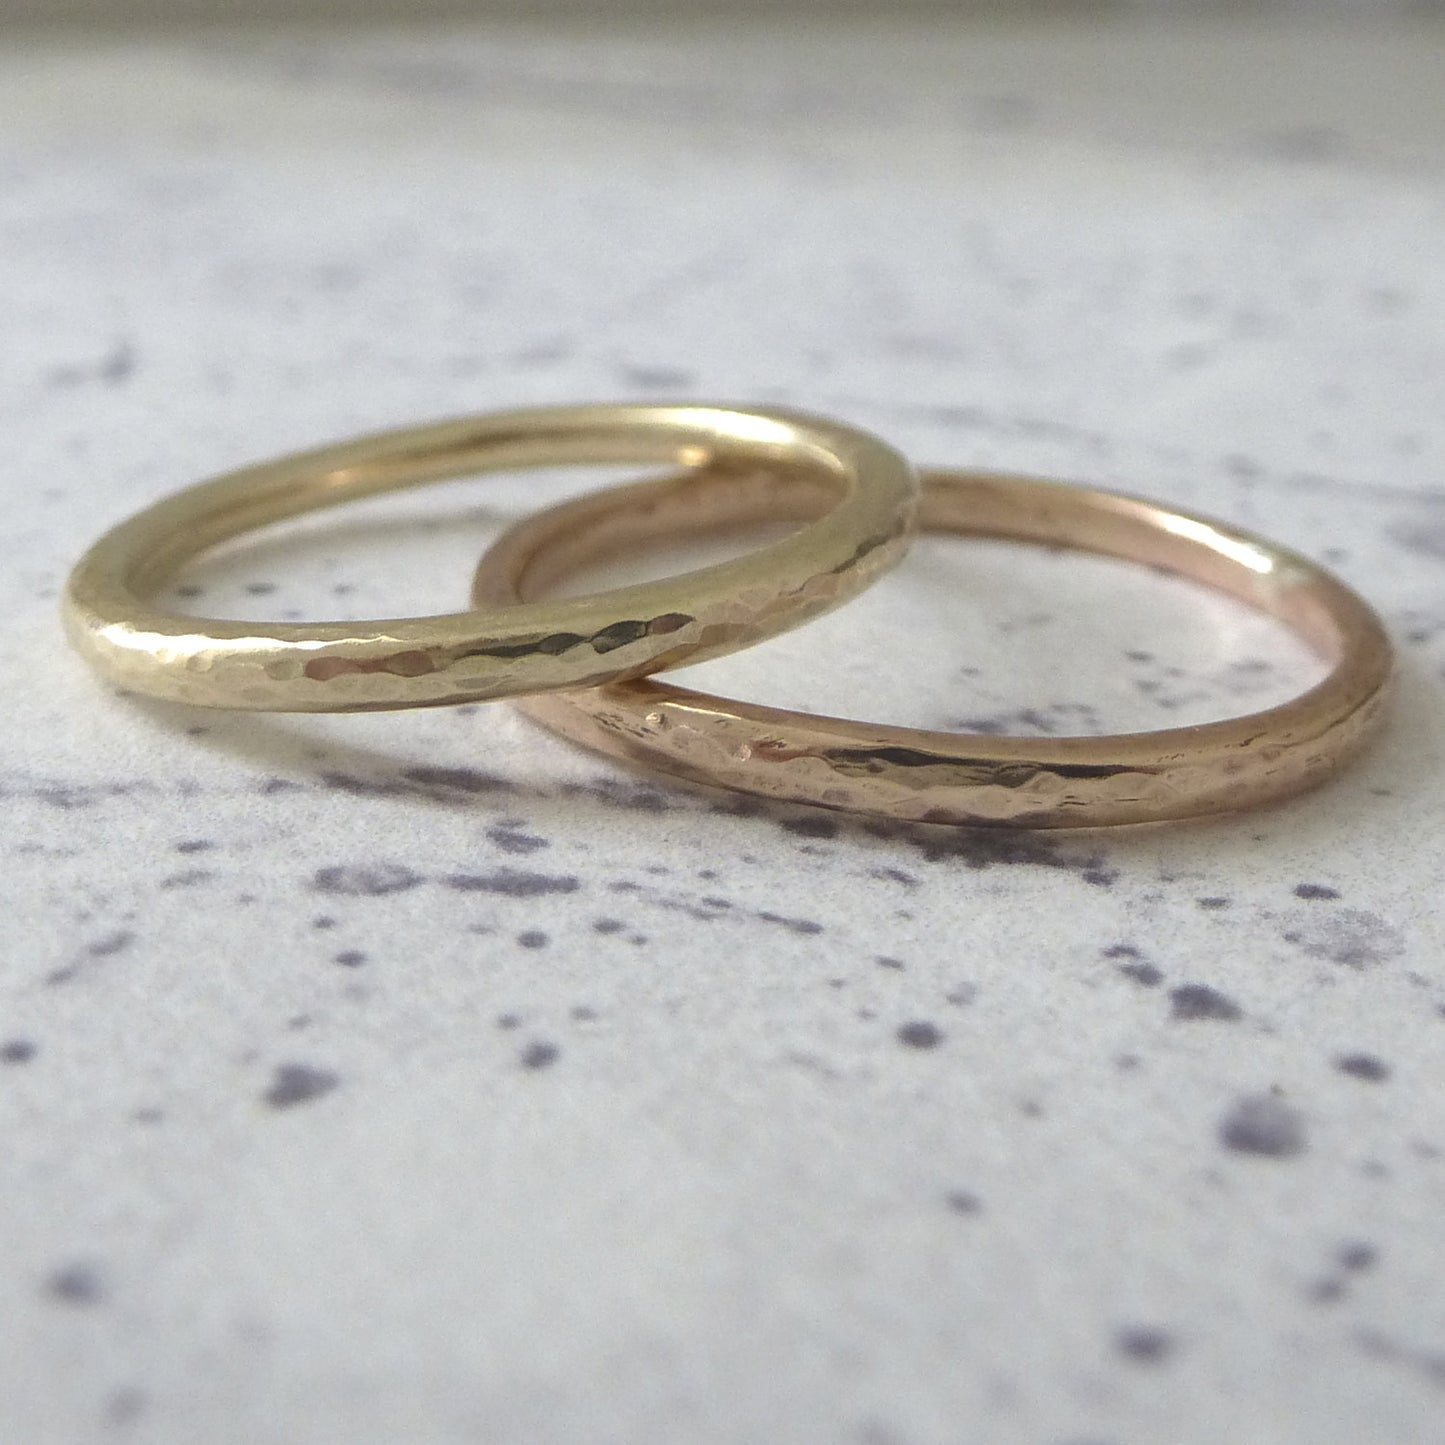 Elegant Band Ring in 9ct Gold - 2mm - yellow - Hammered or Smooth